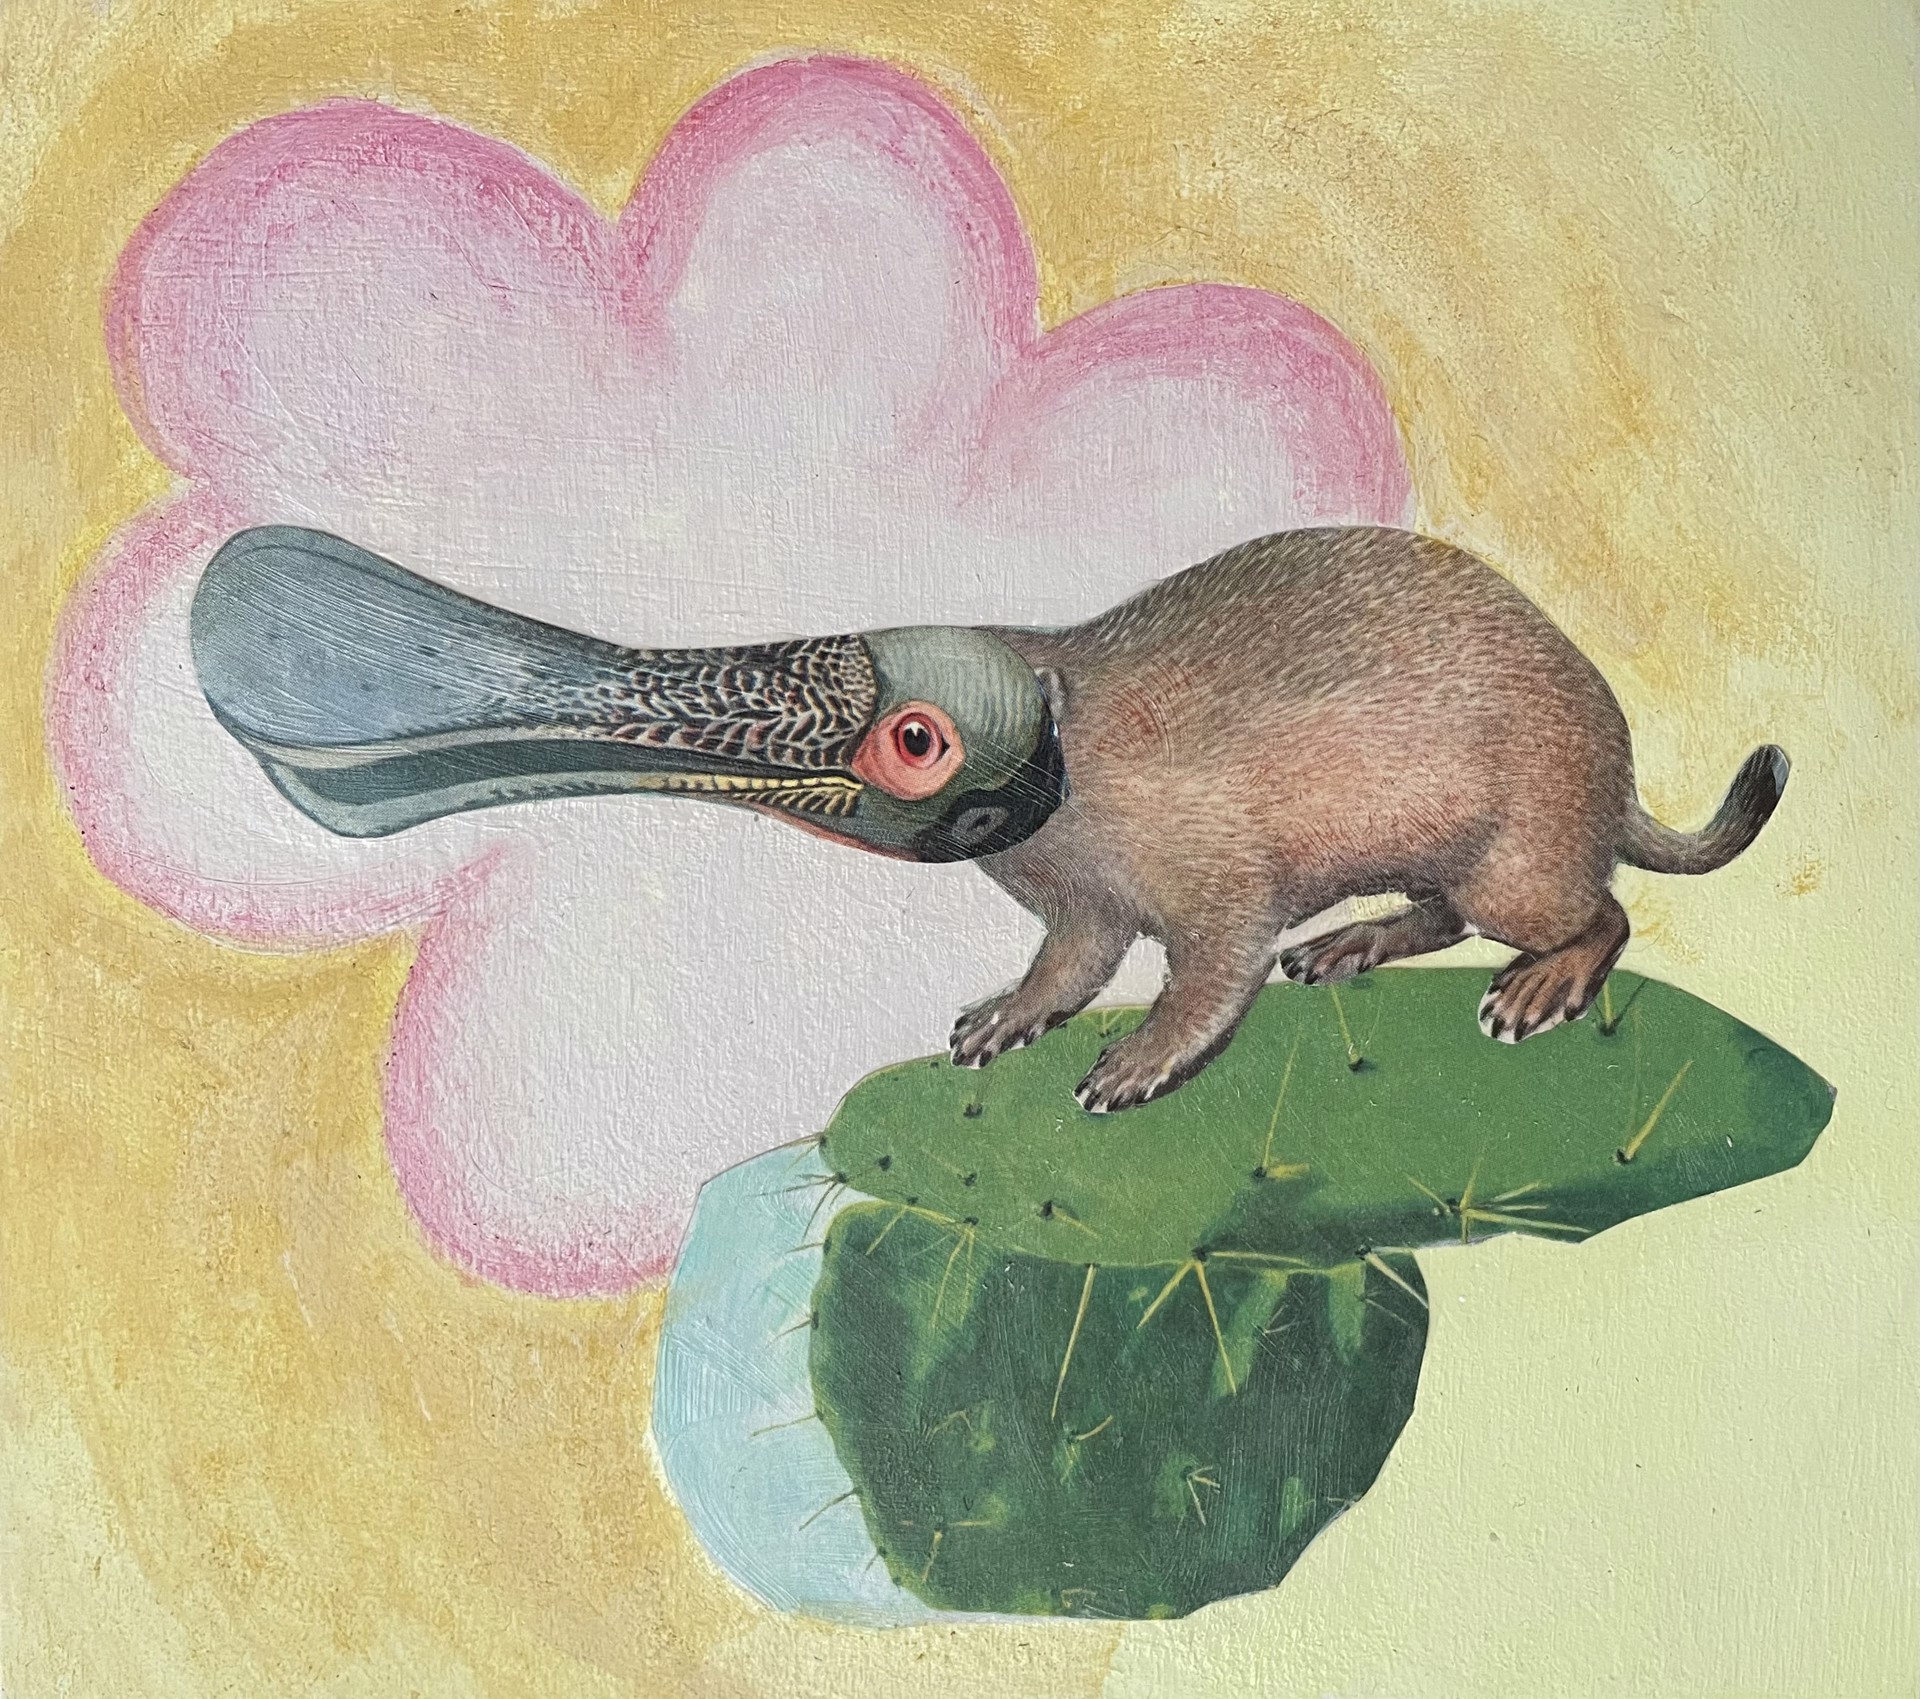 Platypus by Suzanne Sbarge